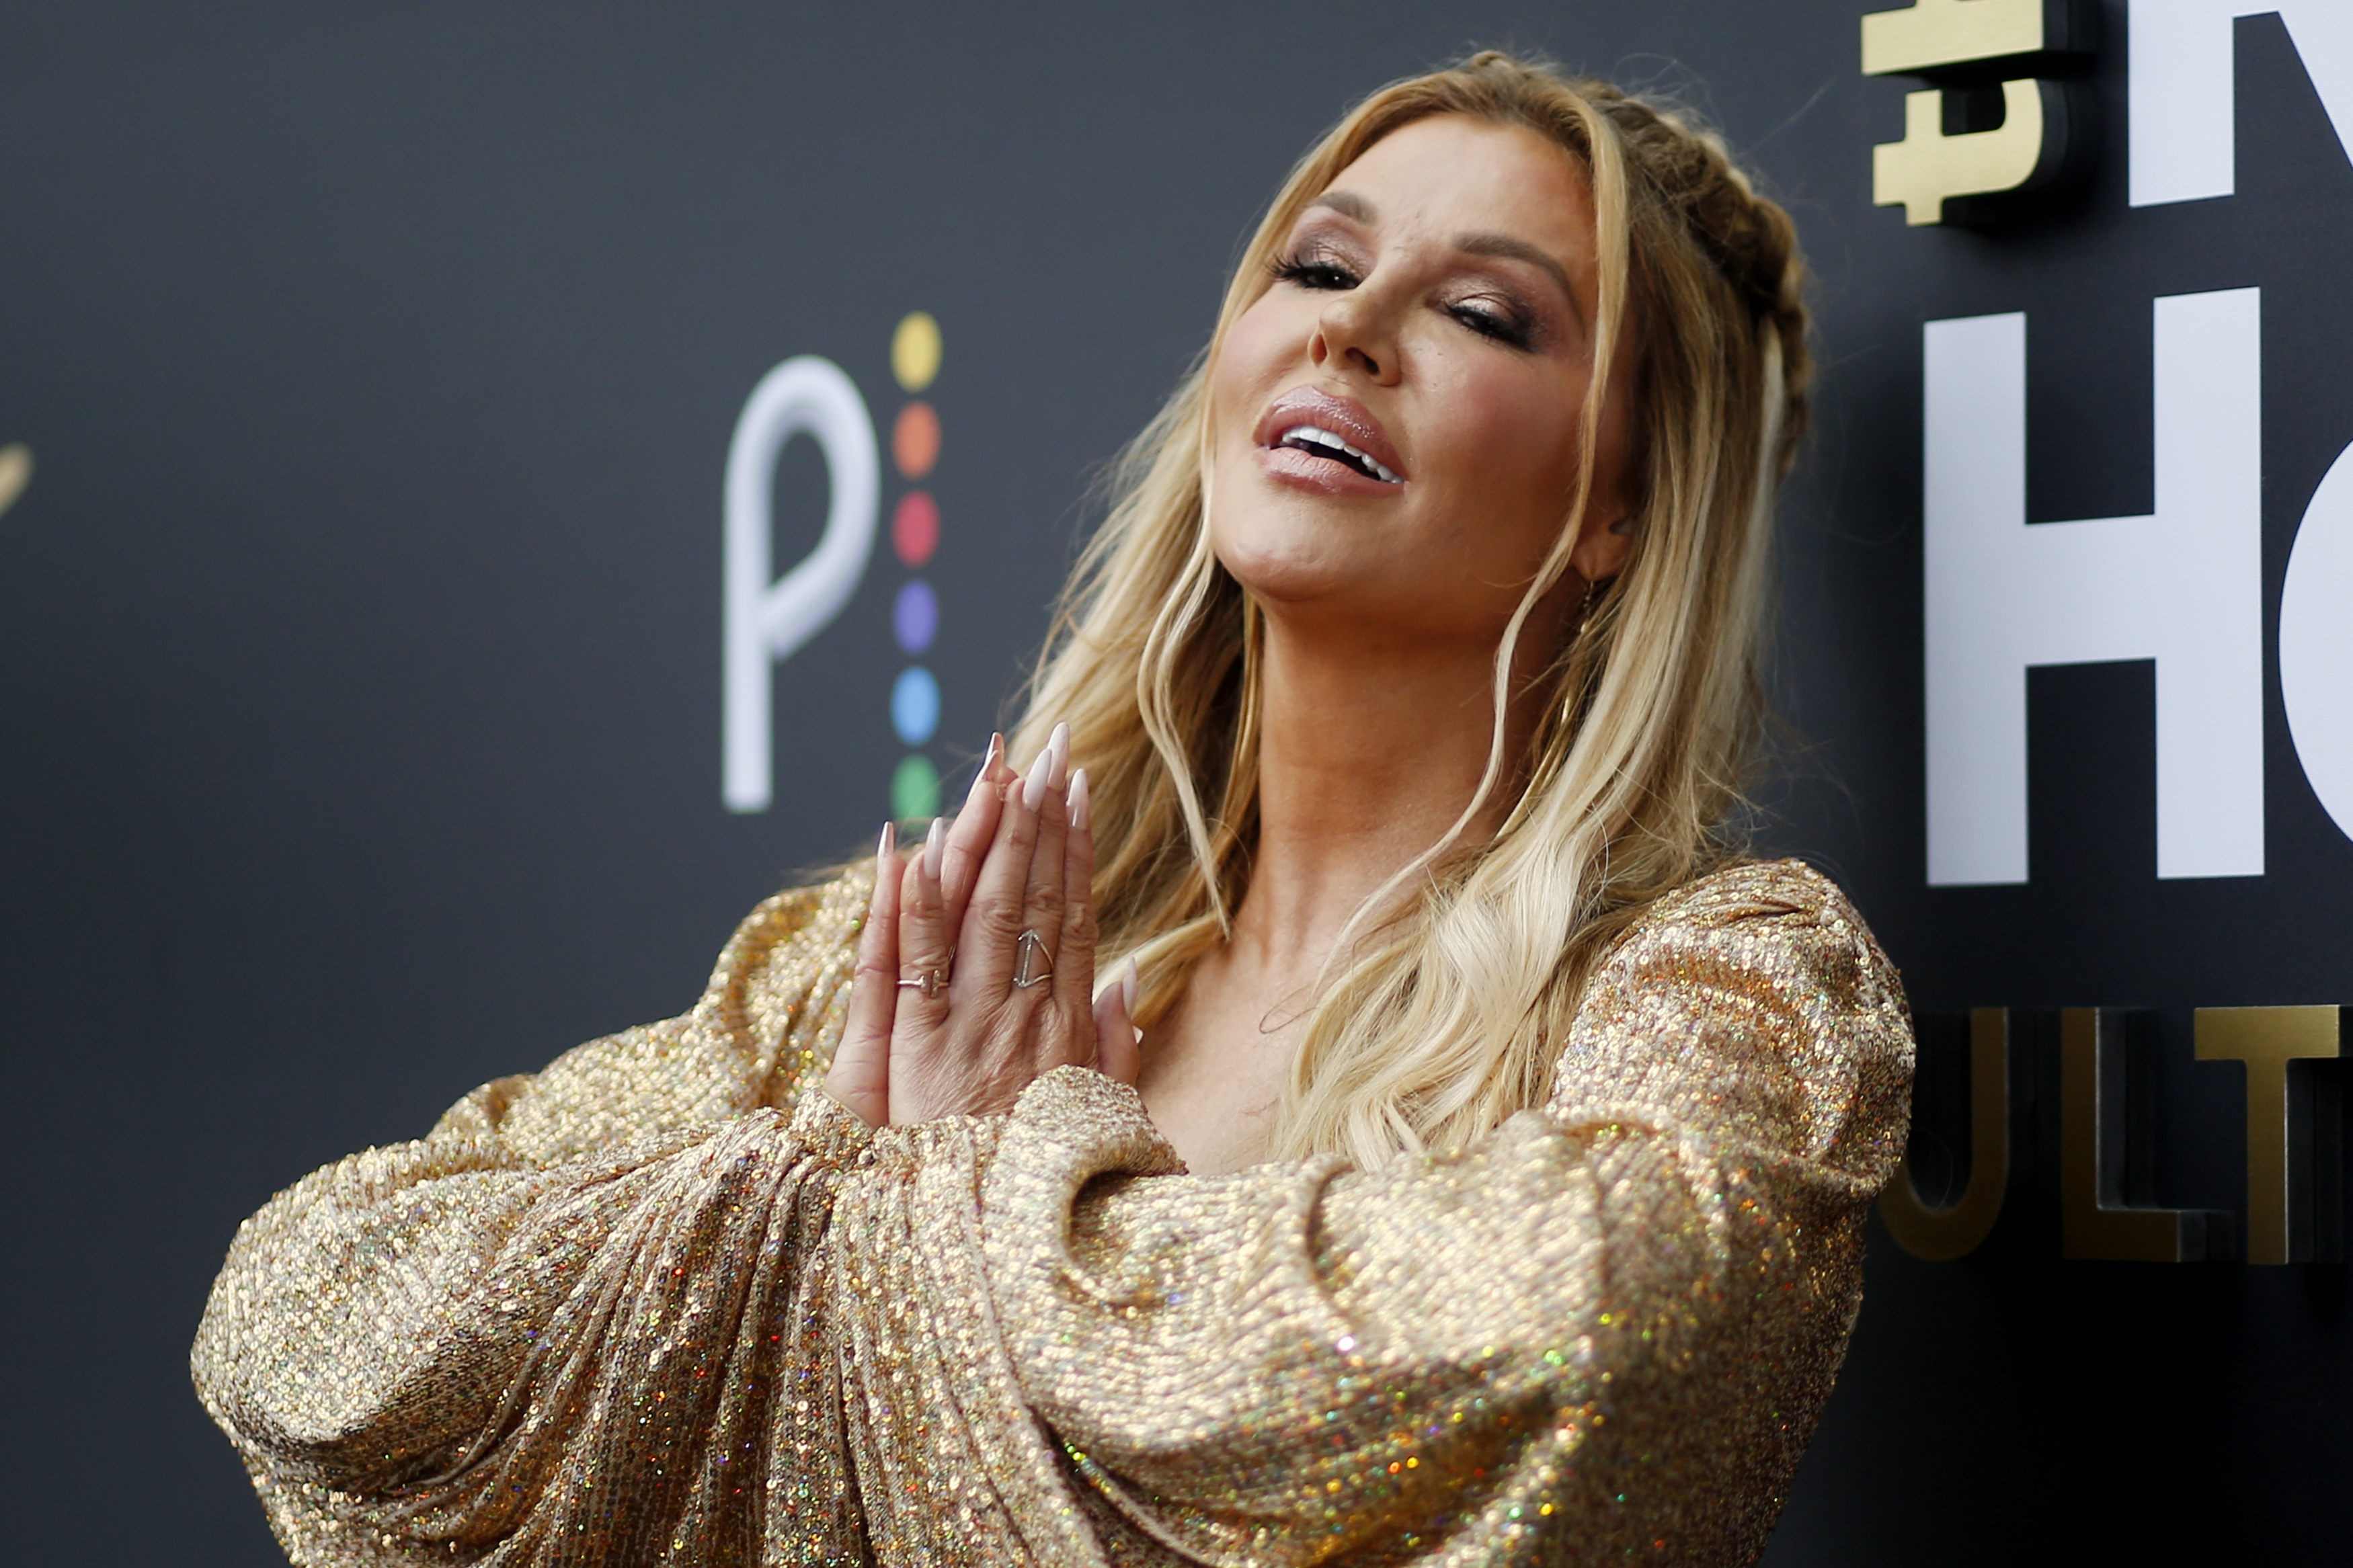 Brandi Glanville Ready to Clear Things Up After Unfair Caroline Manzo Narrative image image